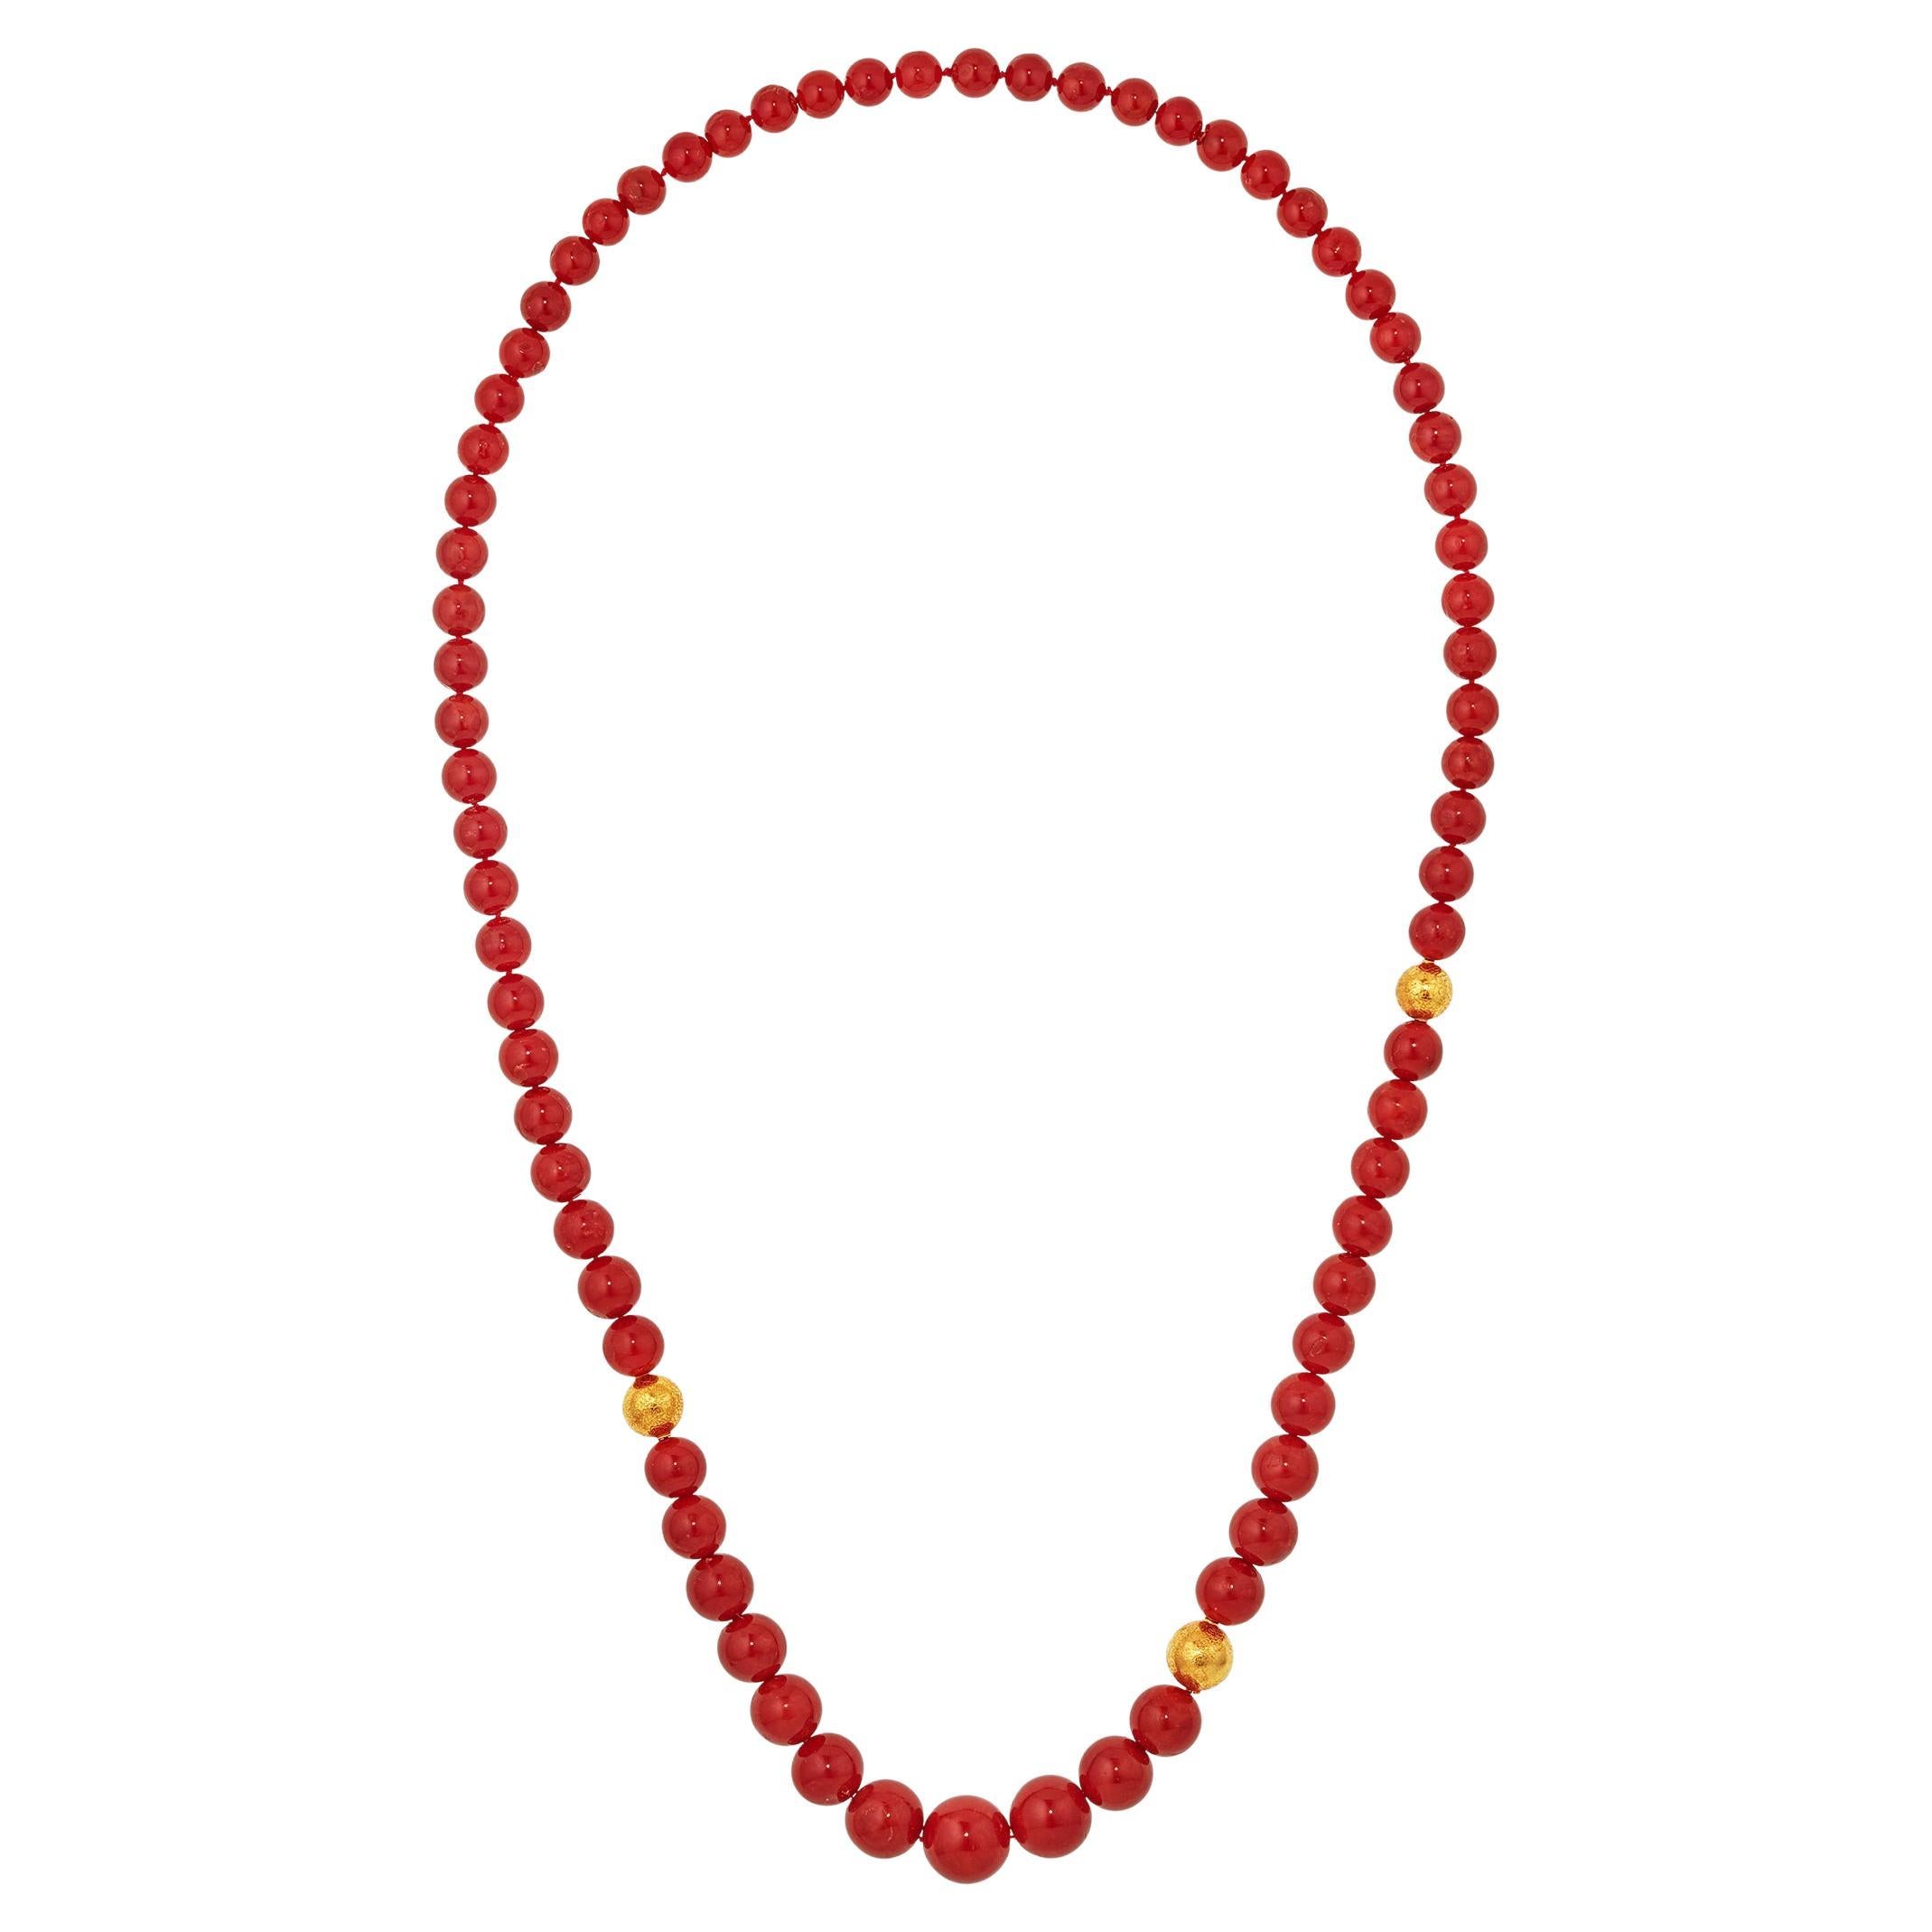 GIA Italian Oxblood Round Bead Coral Necklace with 18 Karat Yellow Gold Accents For Sale